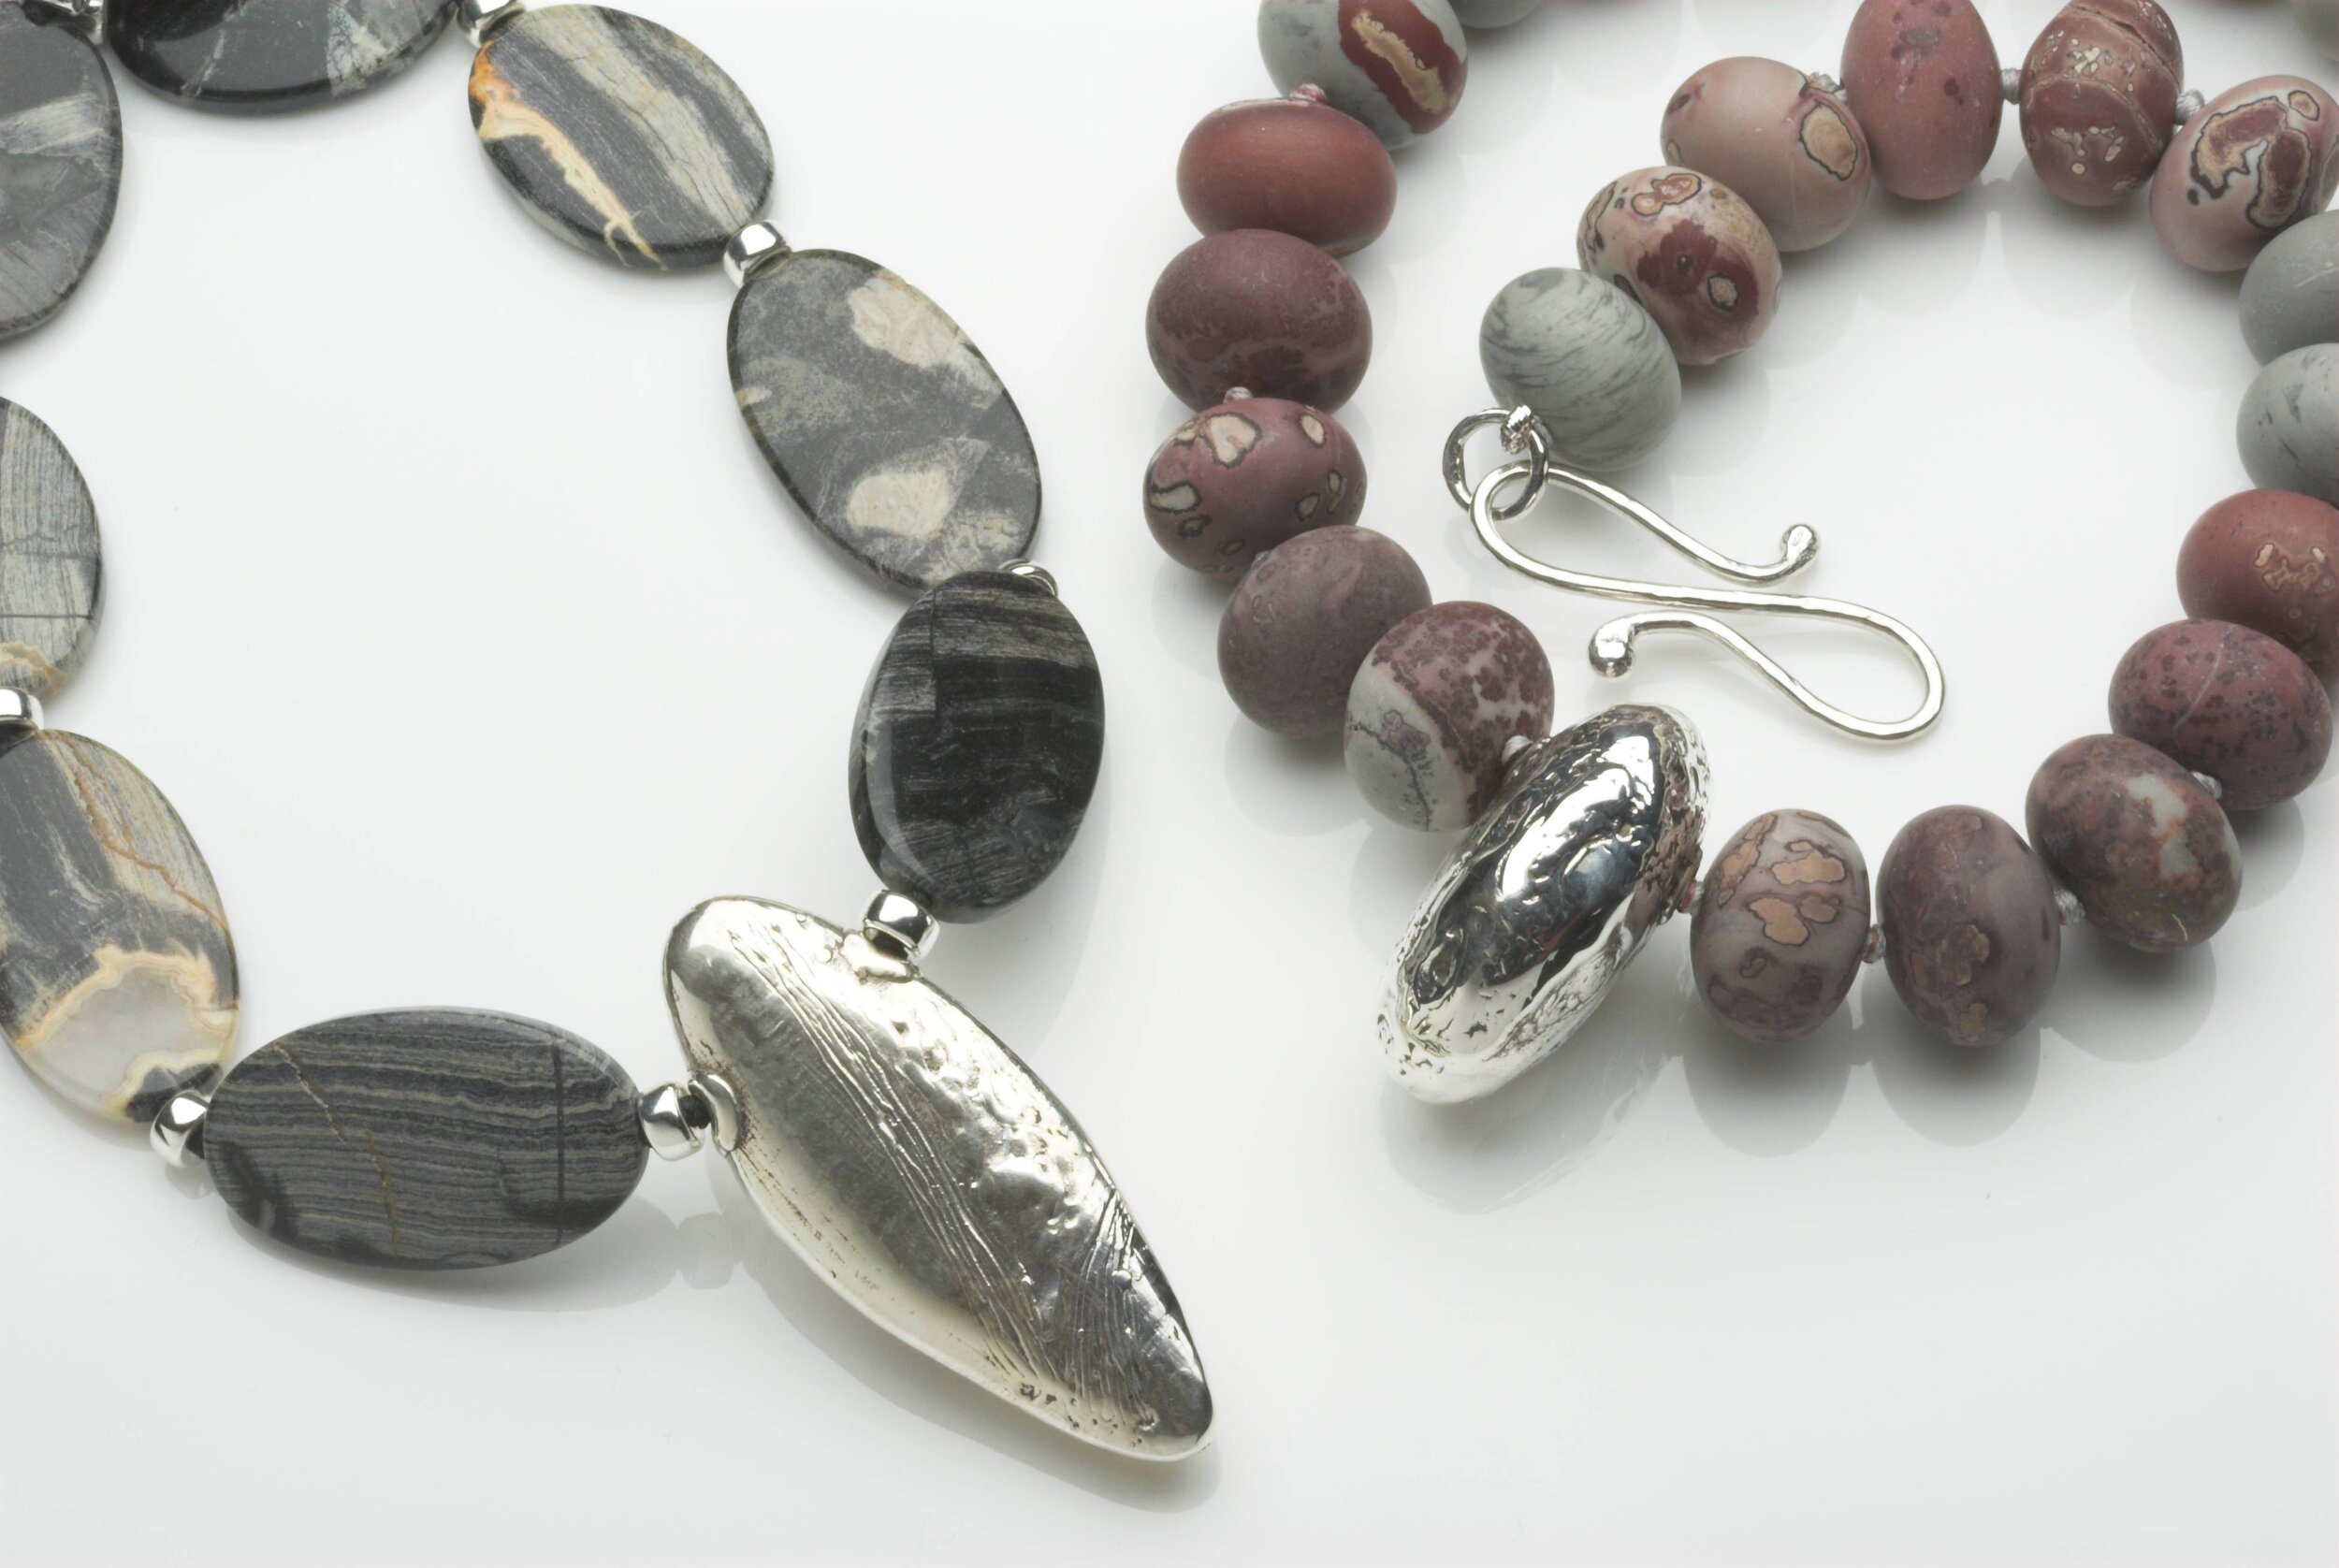 Silver Leaf Jasper and Leopard Skin Jasper Necklaces. £490 and £590 with hallmarked silver pendants.jpg